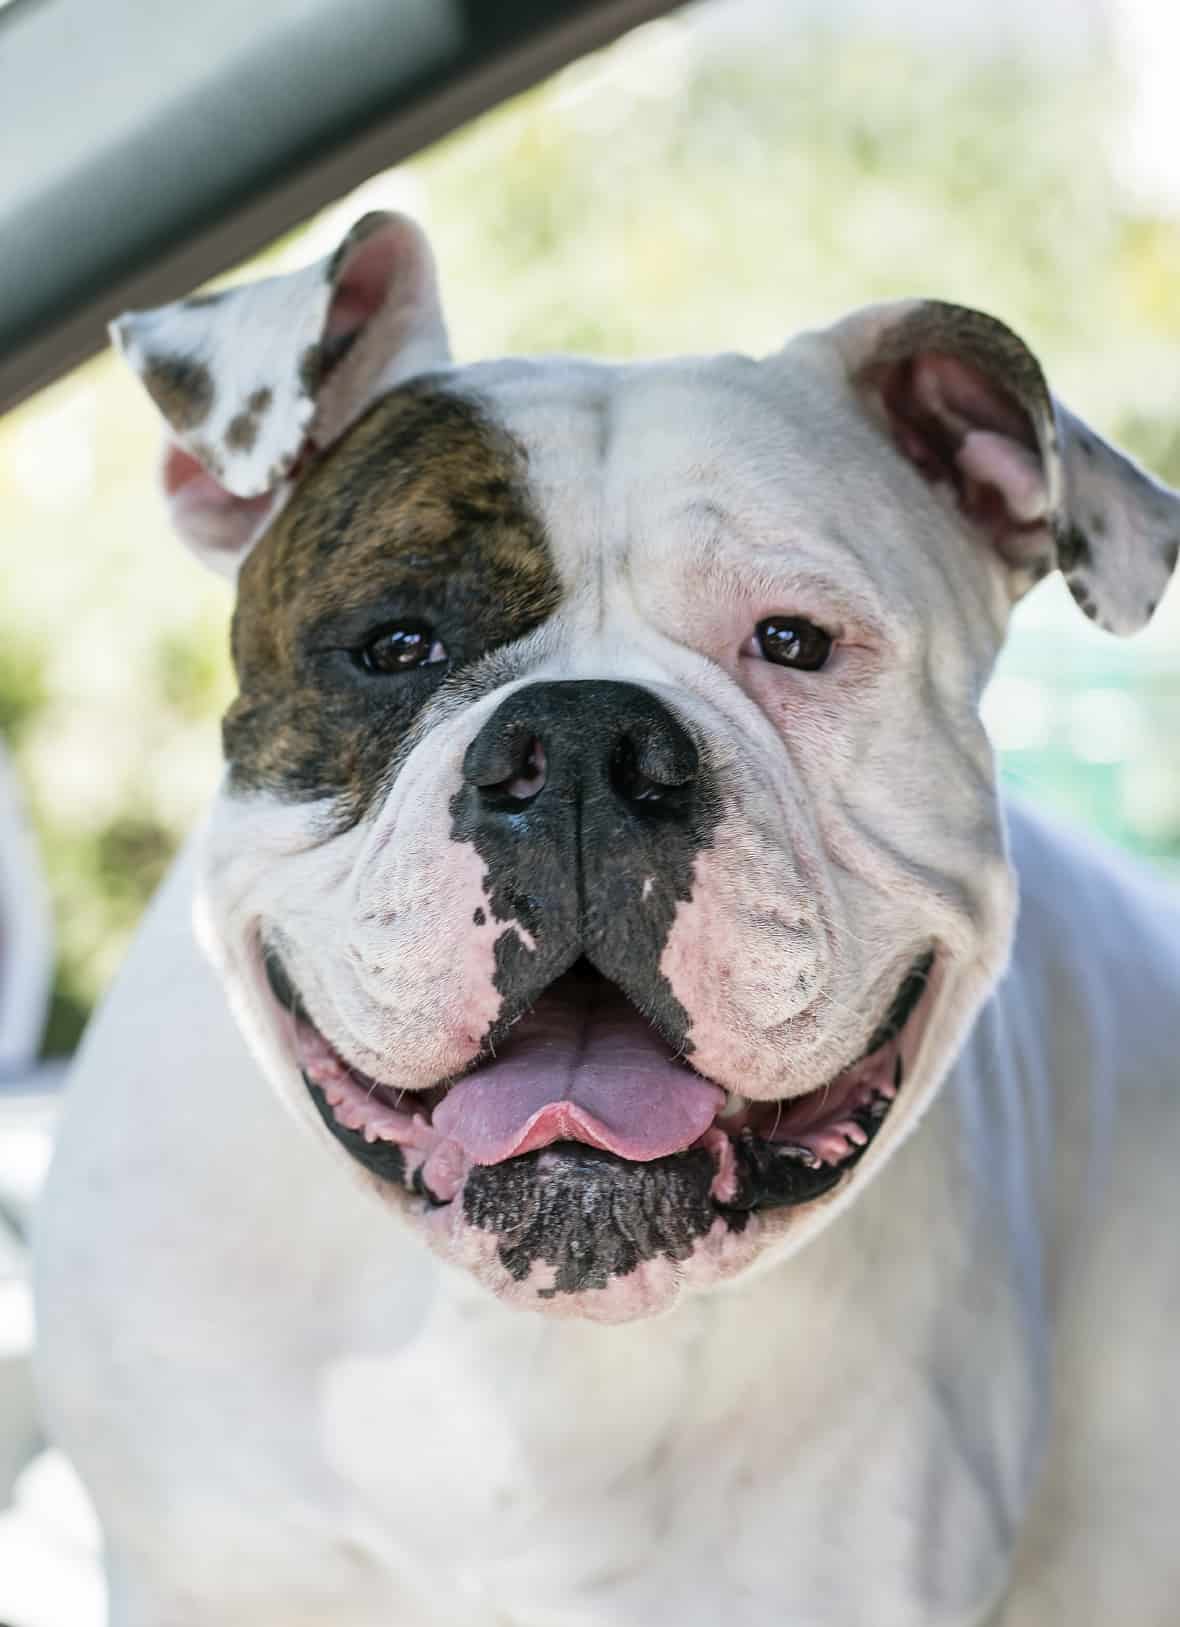 Bulldog smiling and looking out the car window